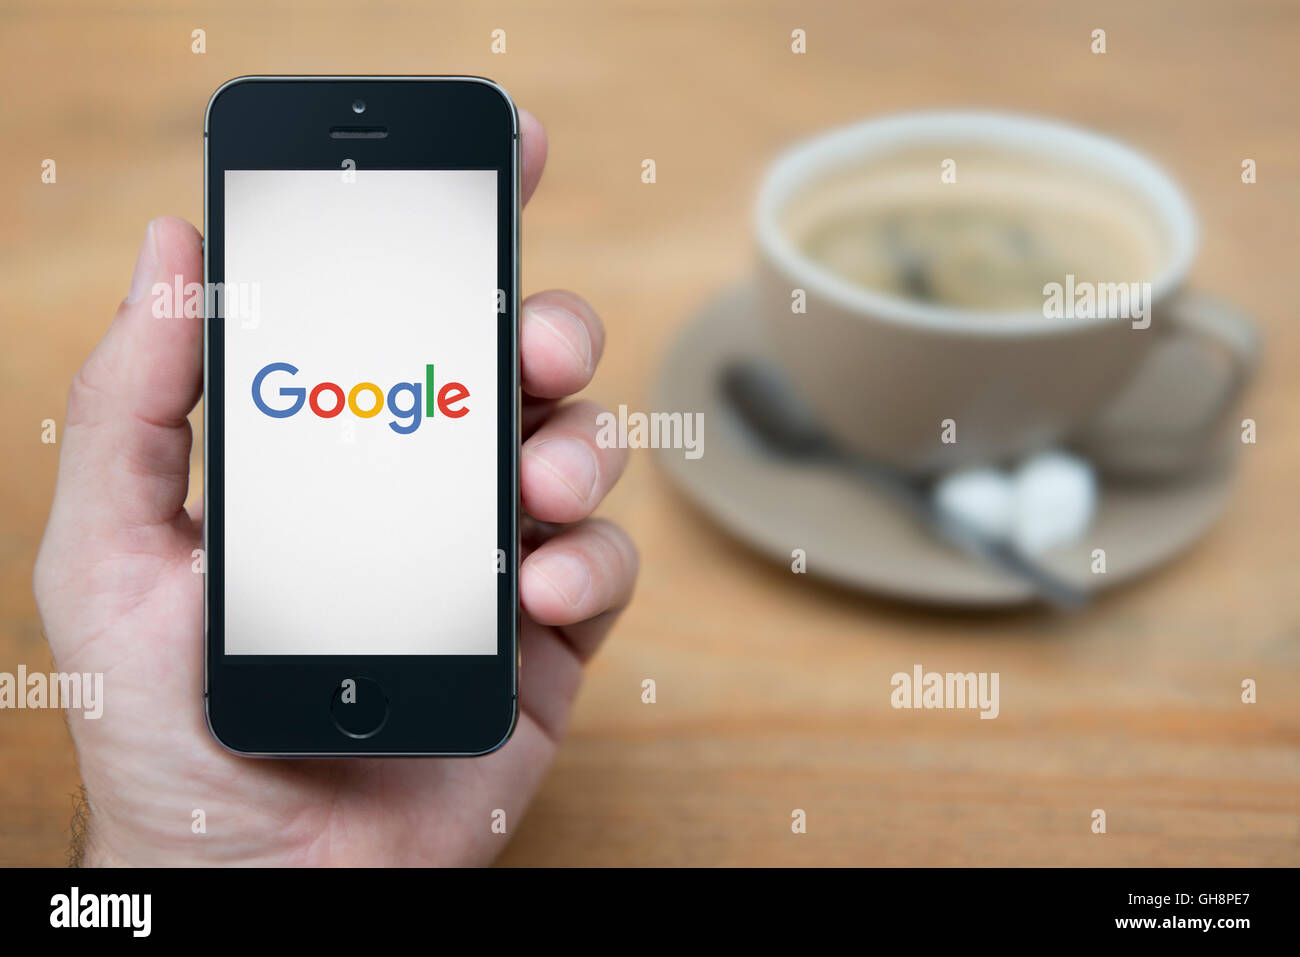 A man looks at his iPhone which displays the Google logo, while sat with a cup of coffee (Editorial use only). Stock Photo